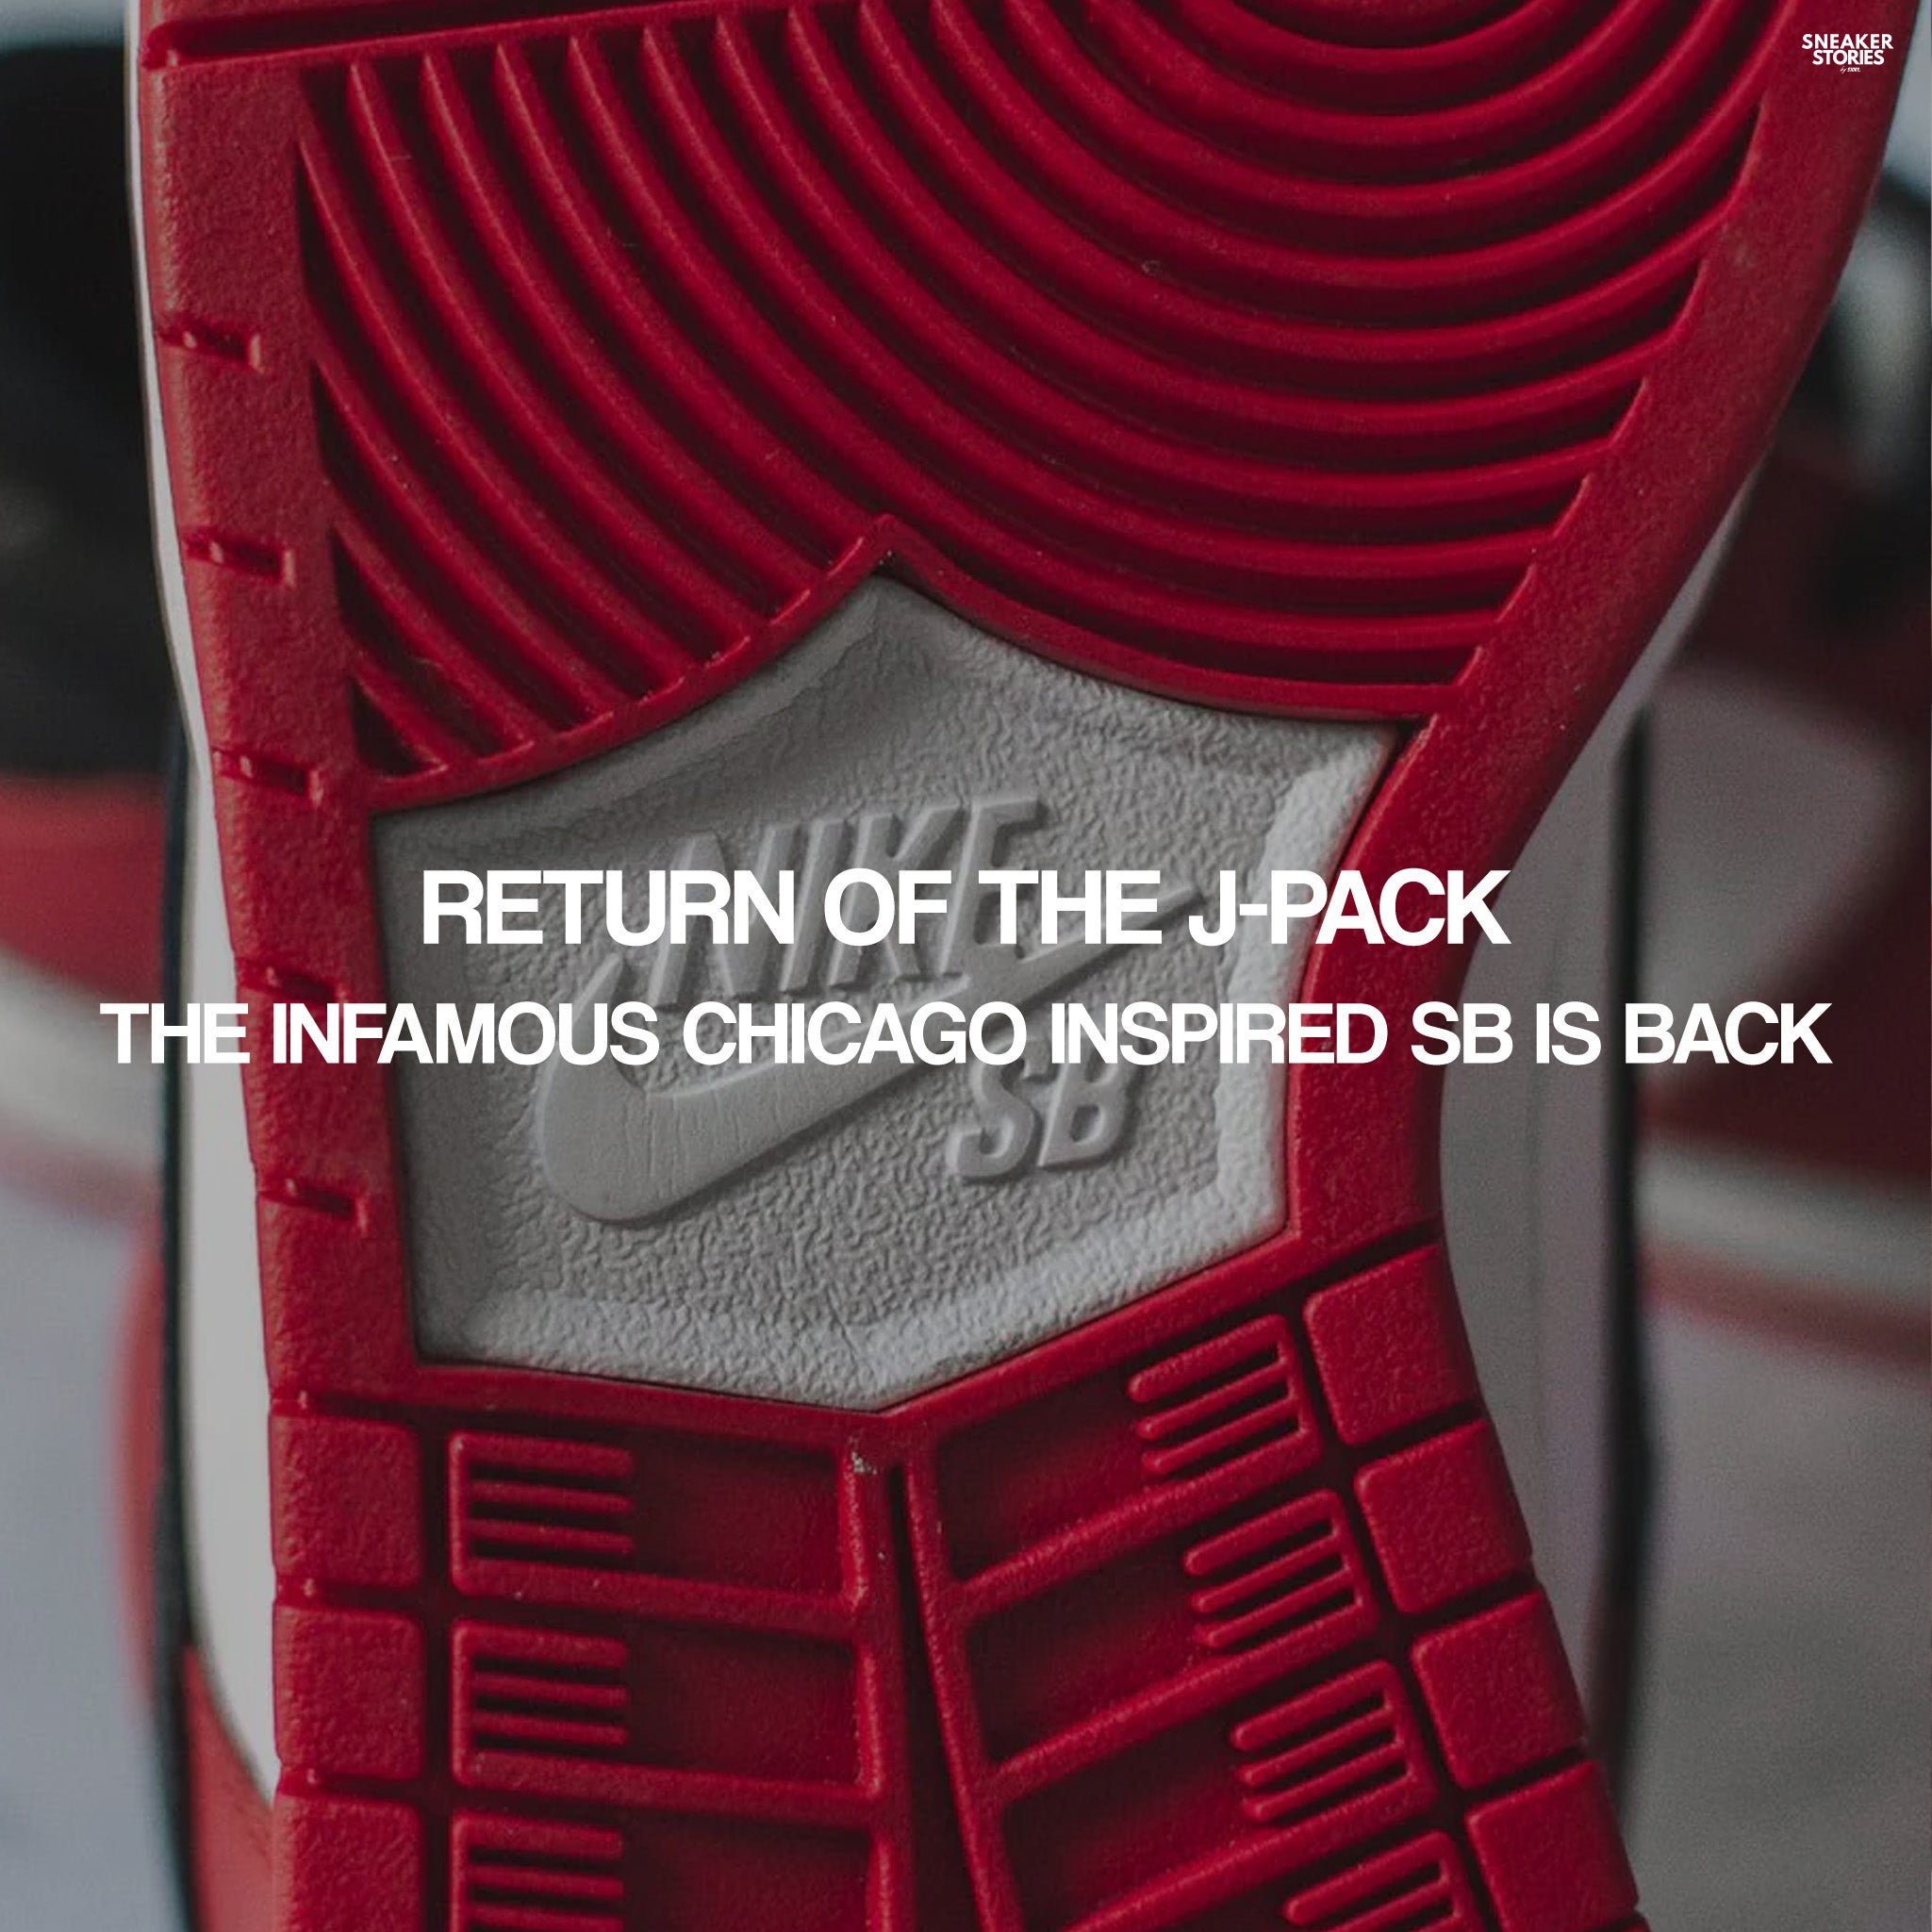 Return of the J-Pack The infamous Chicago inspired SB is back